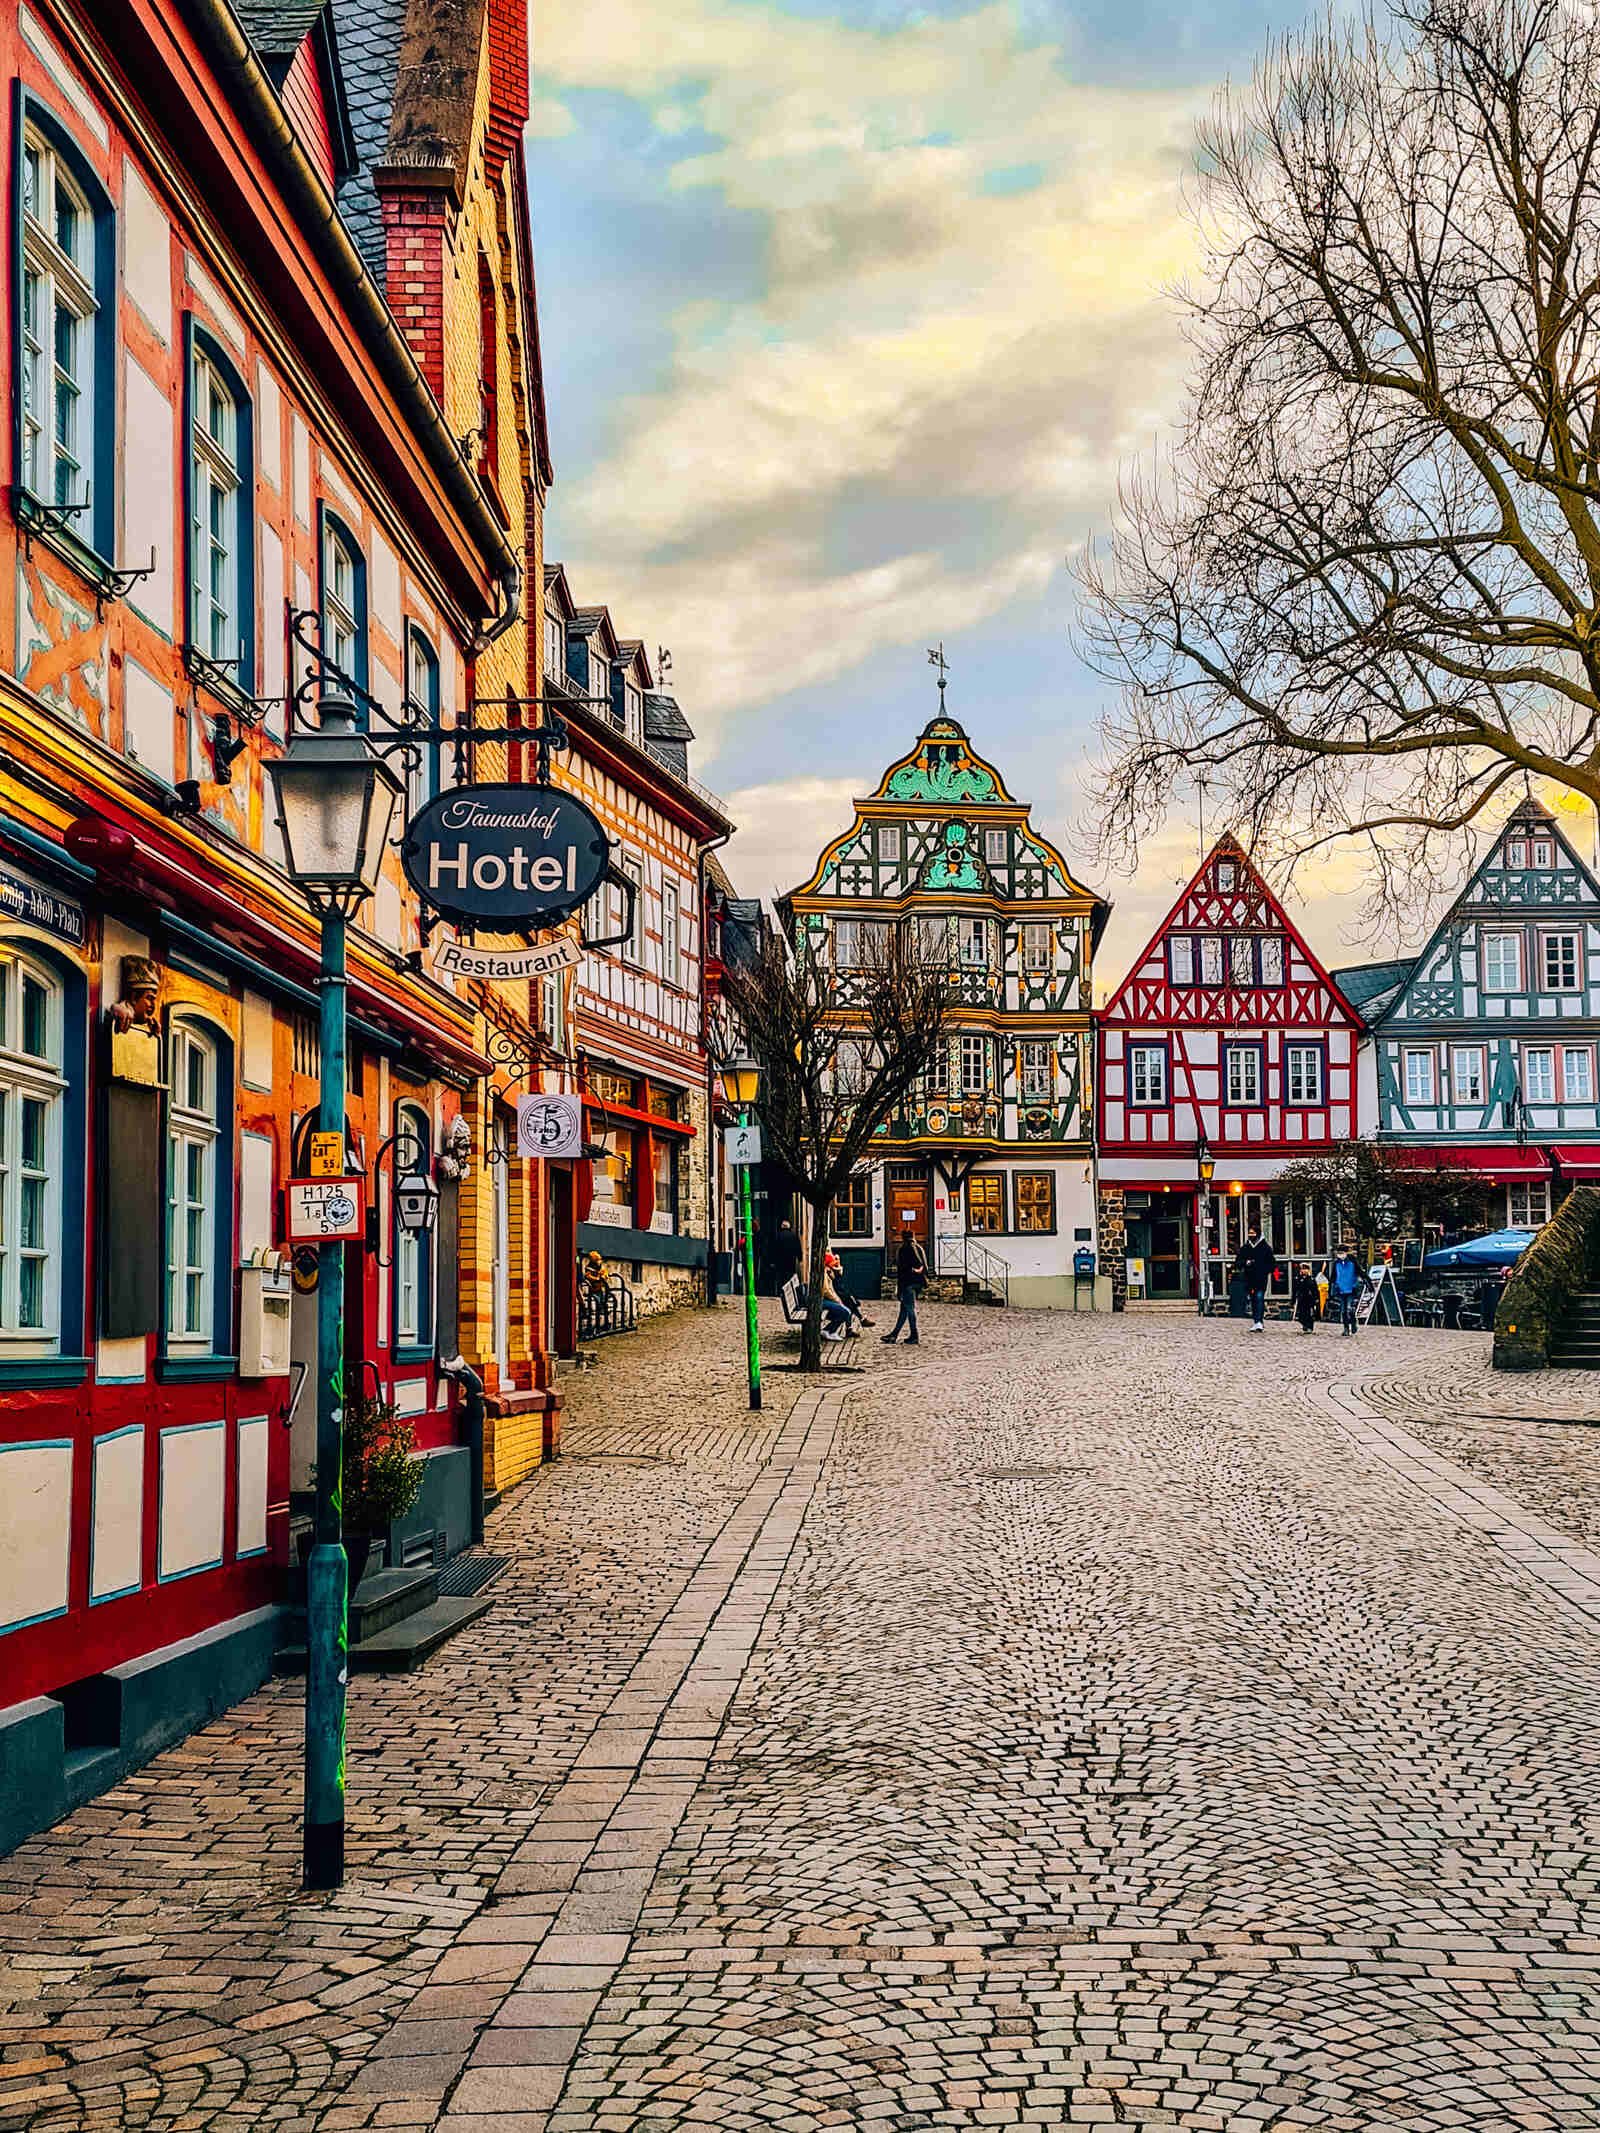 Cobbled streets with many ornately coloured buildings in Germany